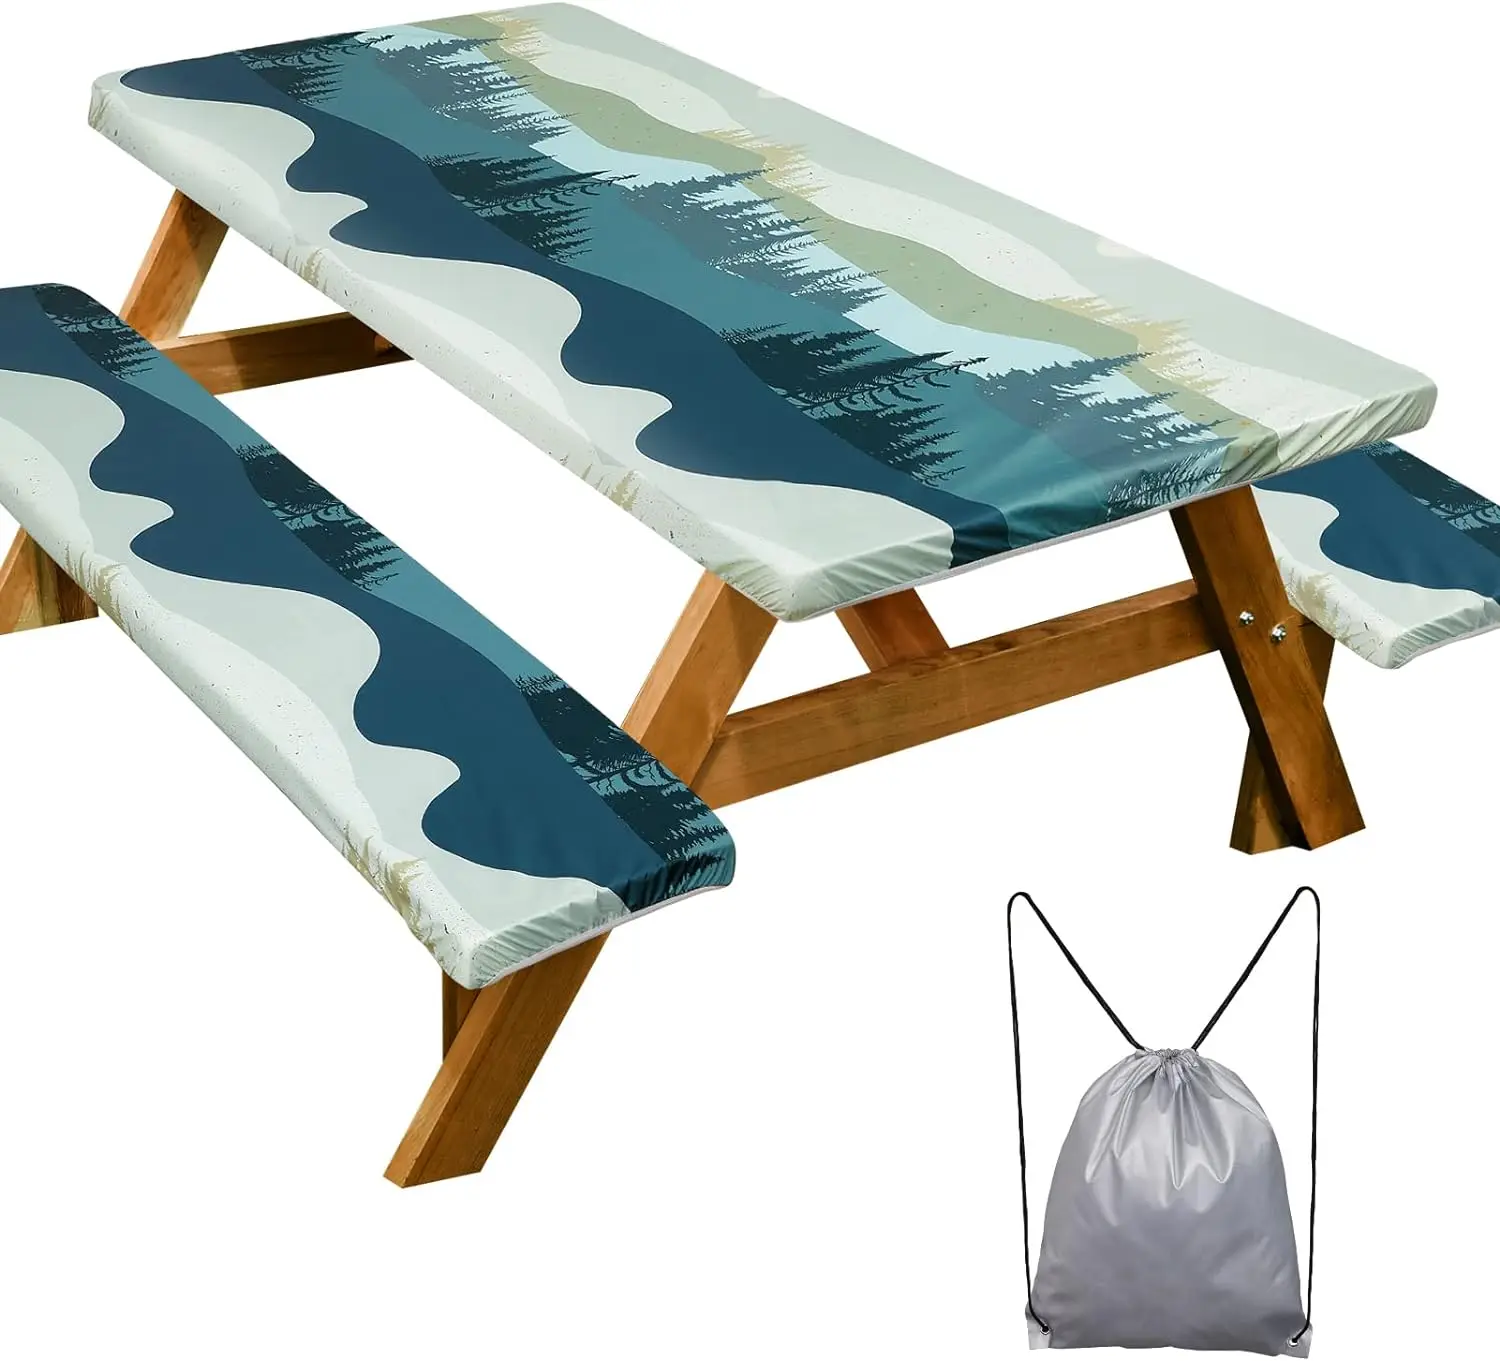 

Picnic Table Cover with Bench Covers Camping Essentials Waterproof Windproof Camping Tablecloth with Drawstring Bag